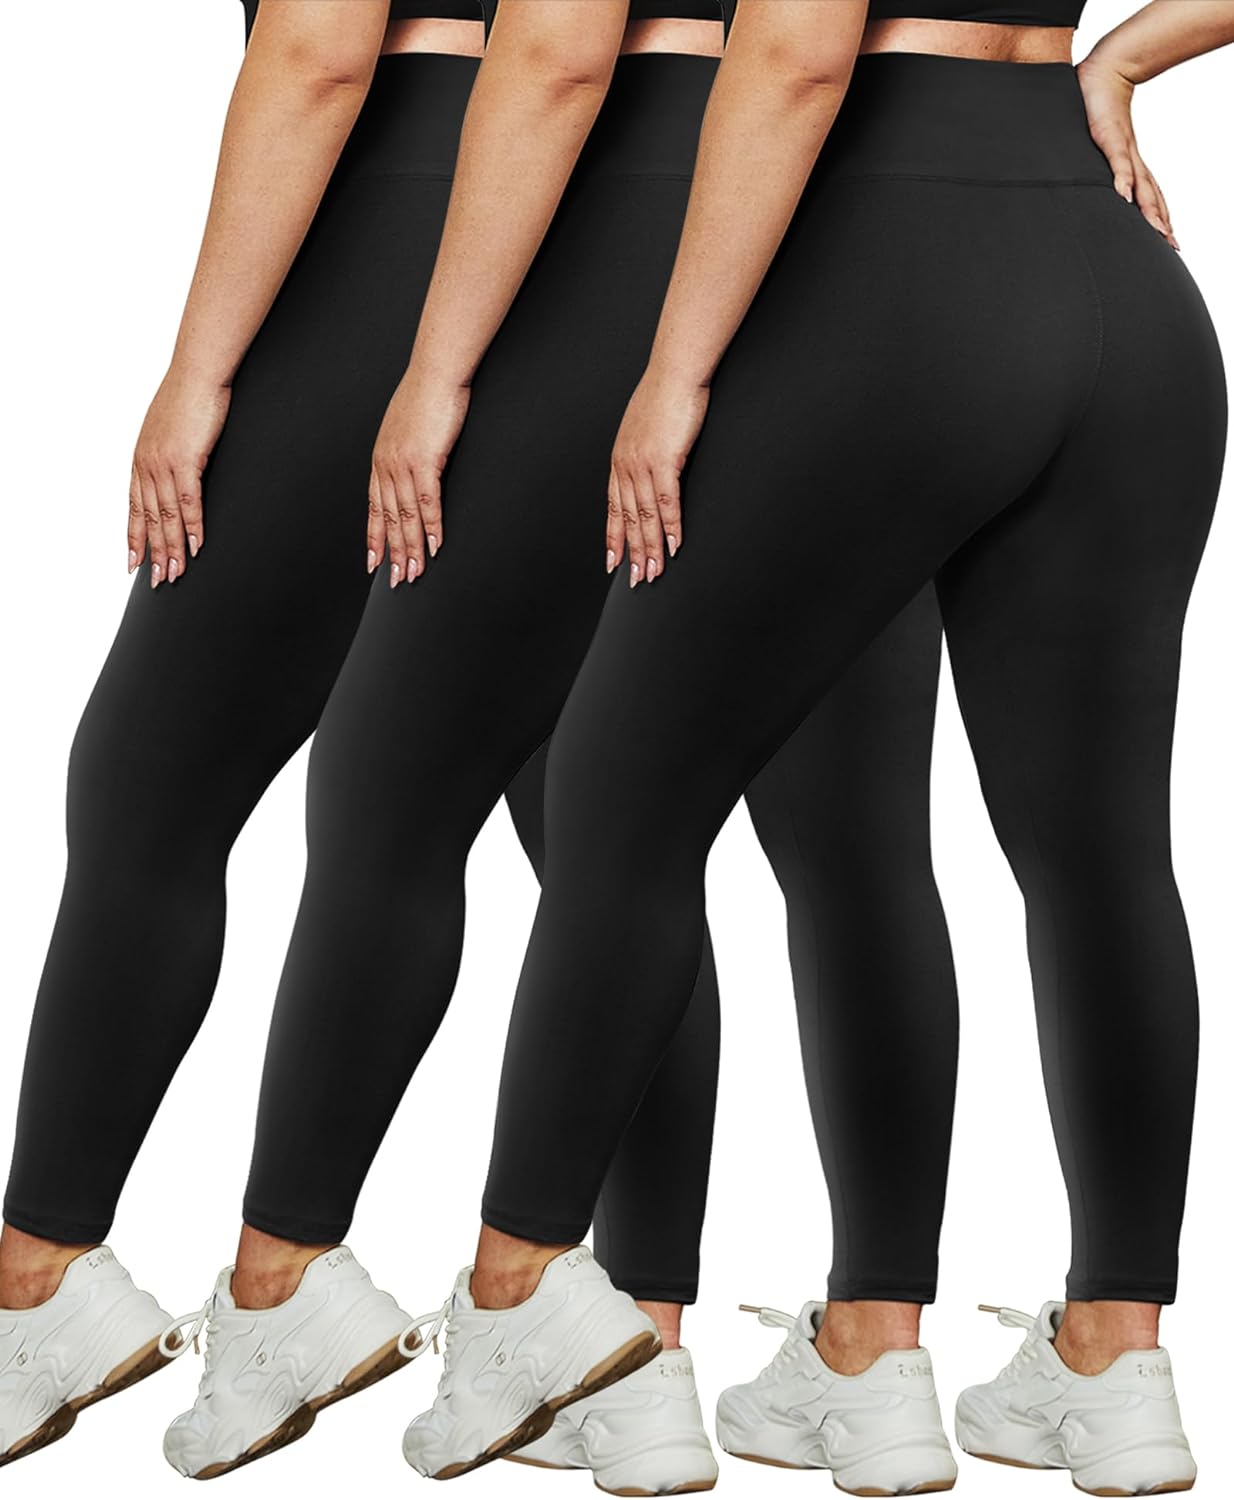 3 Pack Plus Size Leggings for Women - High Waist Stretchy Soft Yoga Pants for Workout Running